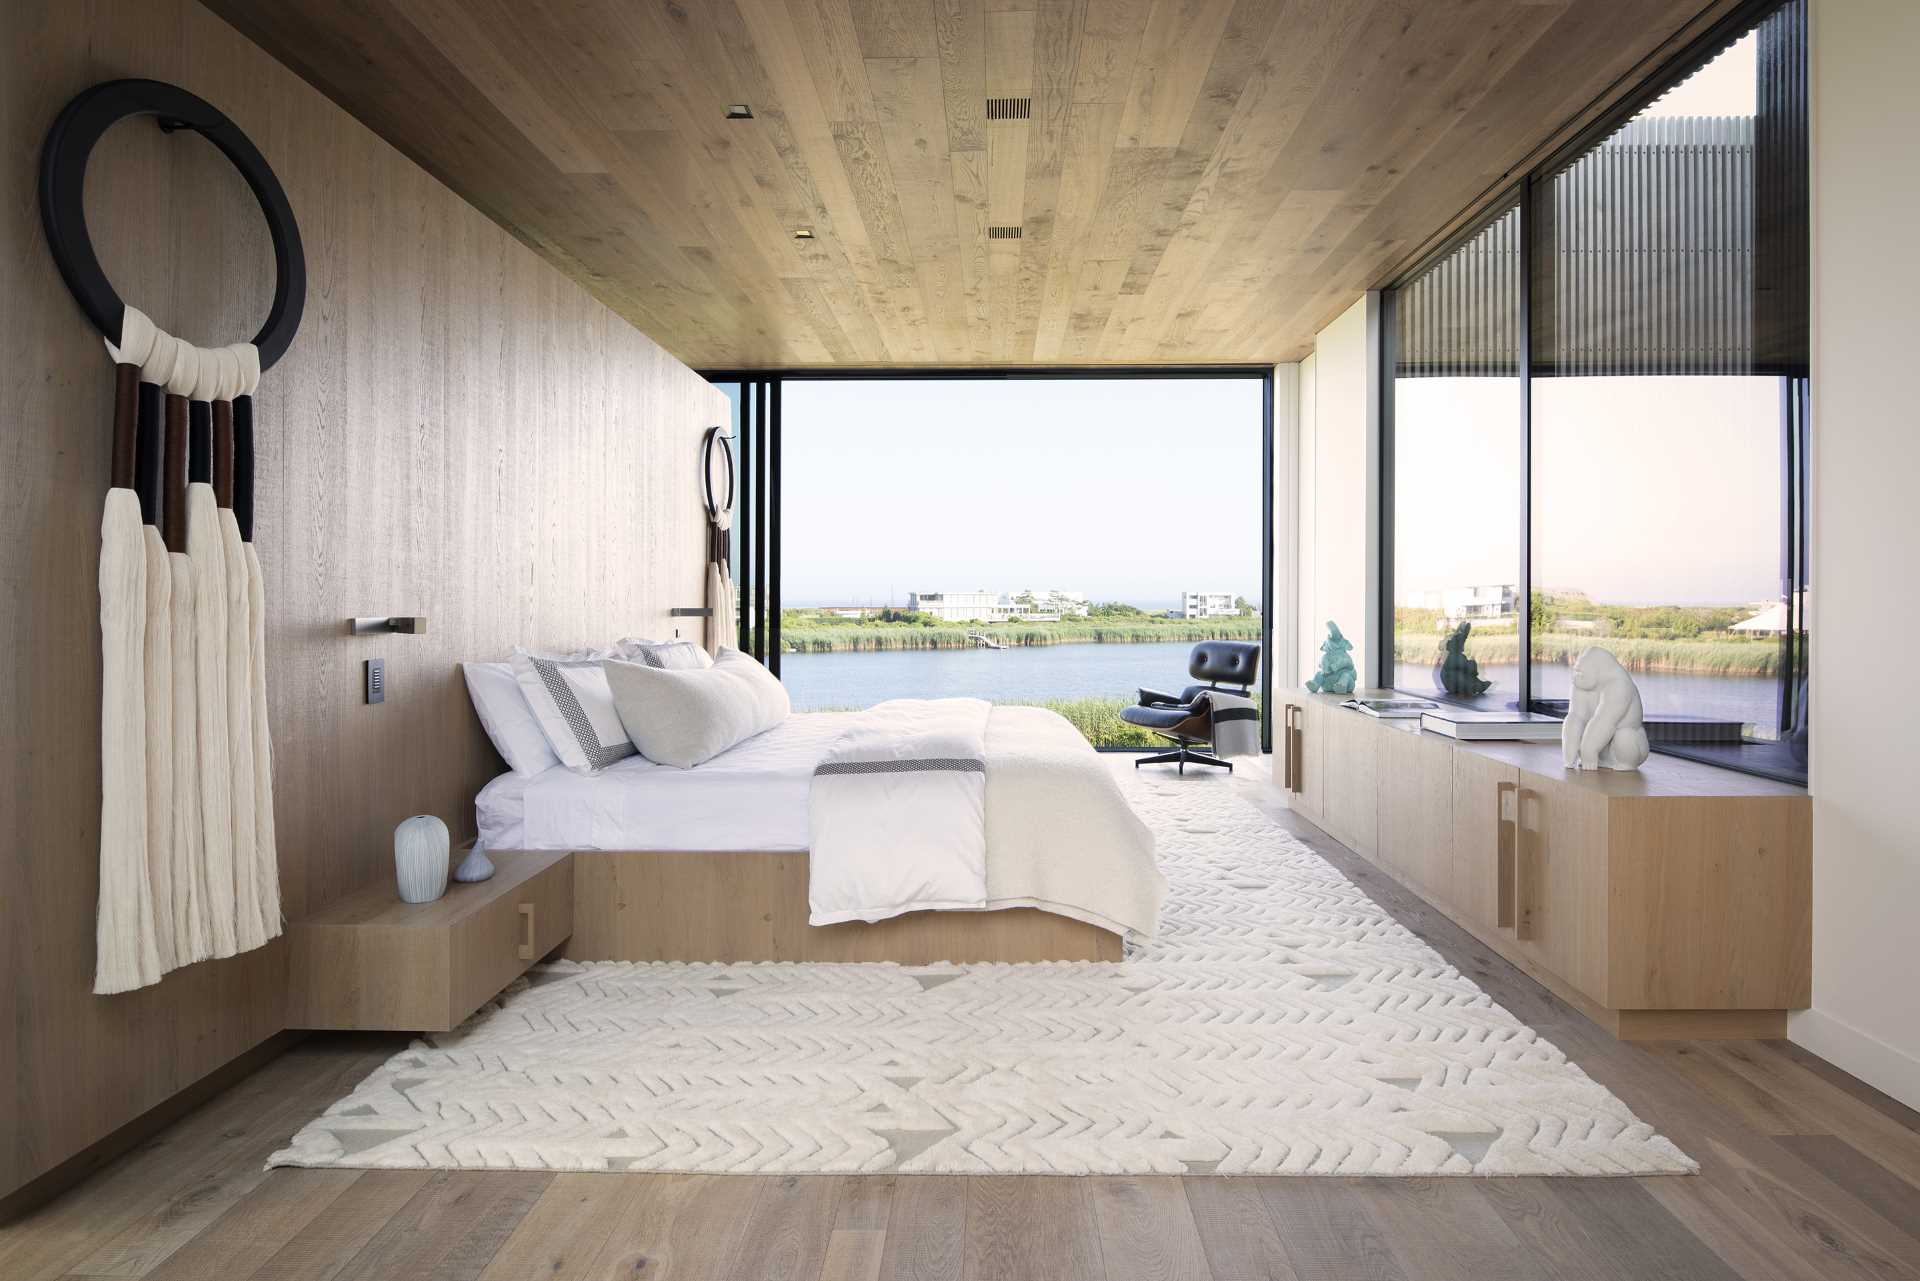 In this modern bedroom, a palette that includes woods and creams allows the view to become the focal point, and at the same time creates a calm atmosphere.